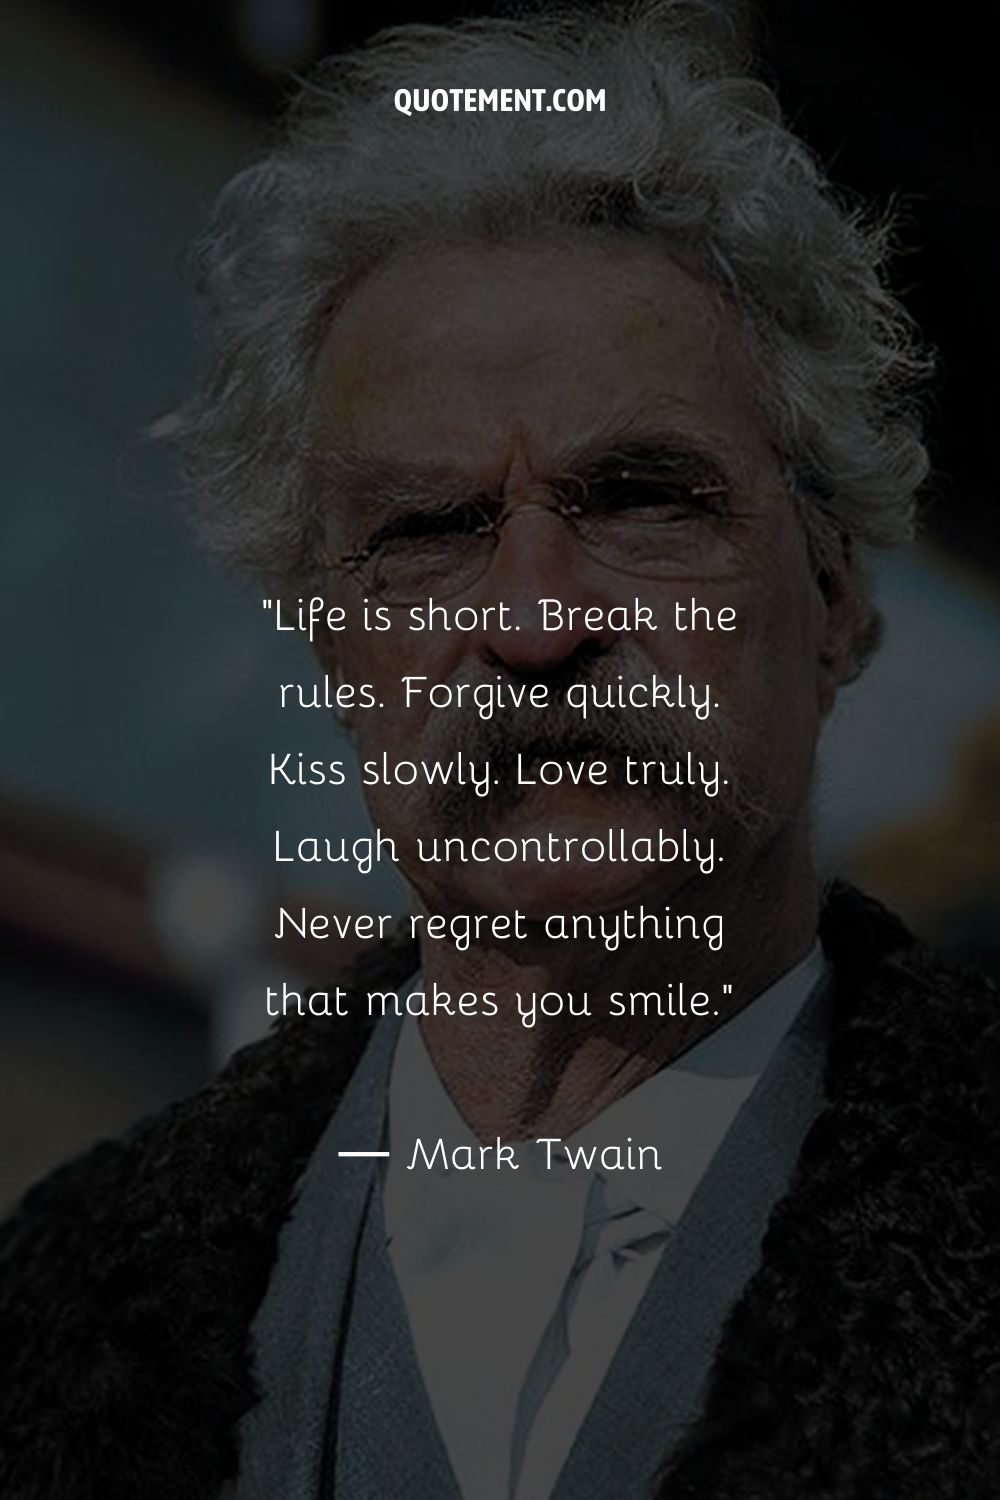 A close-up of a frowned Mark Twain representing a famous Mark Twain quote
